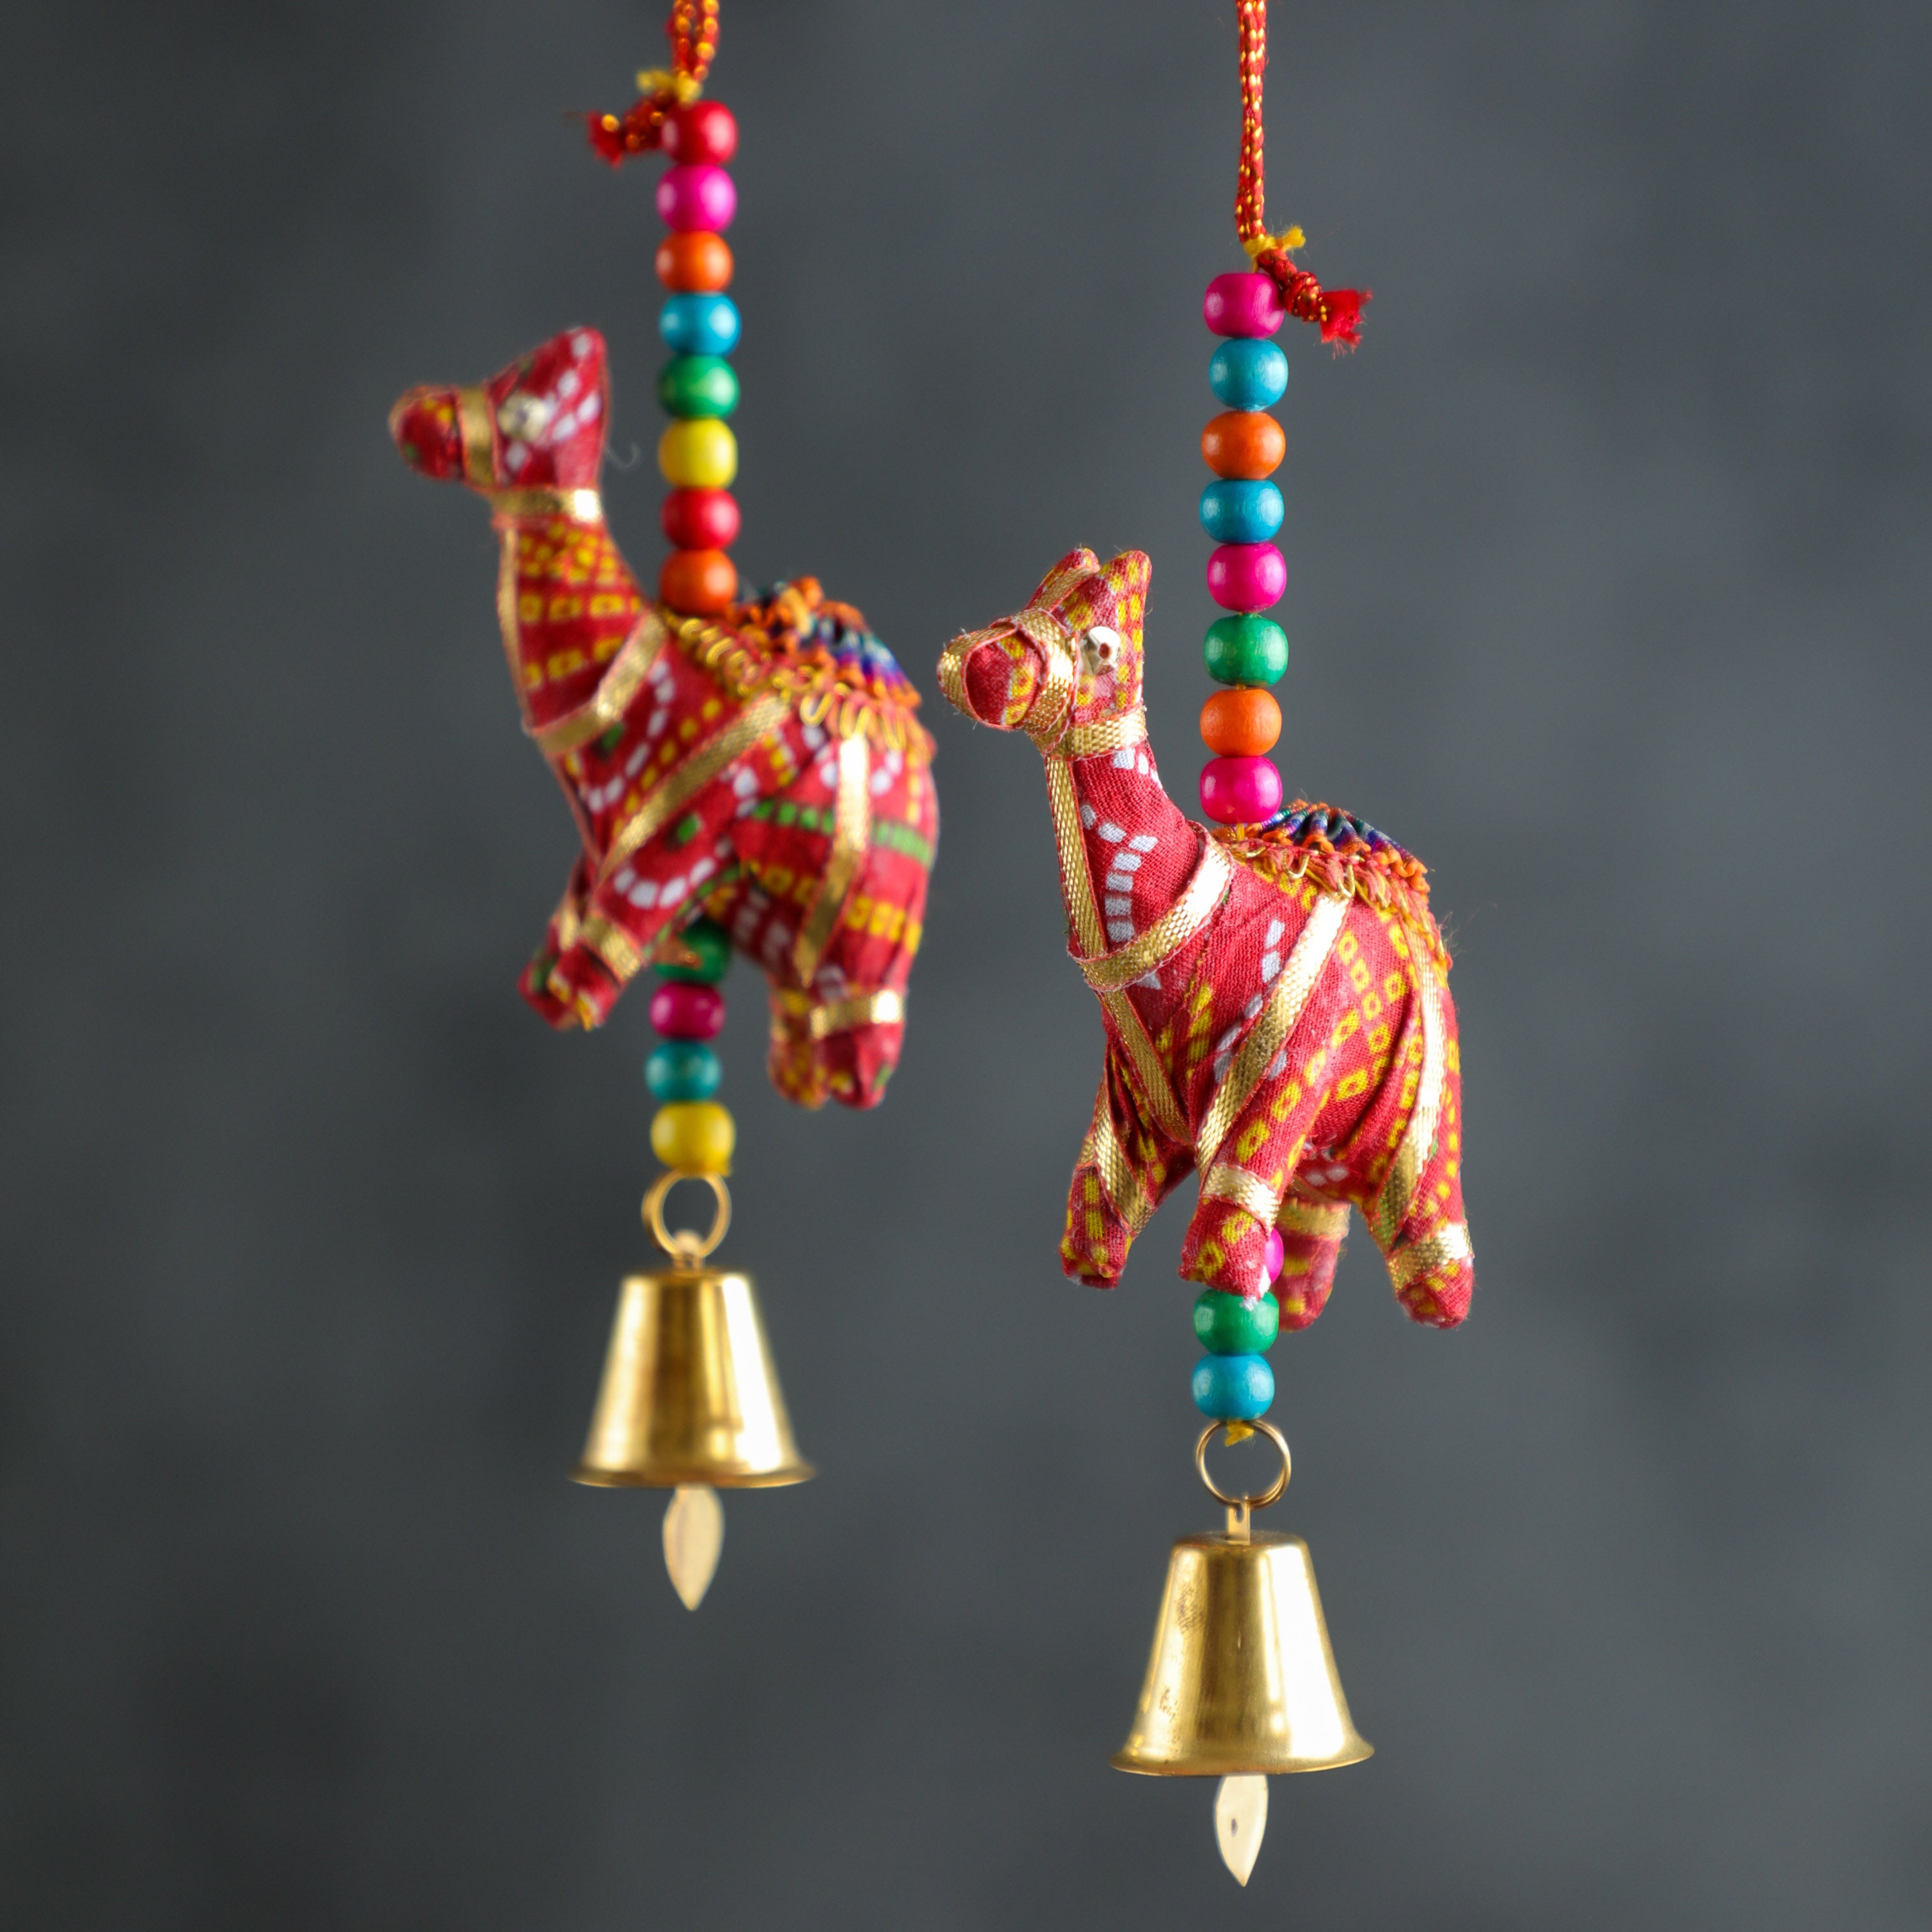 Rajasthani Fabric Camel Charm for Gifting